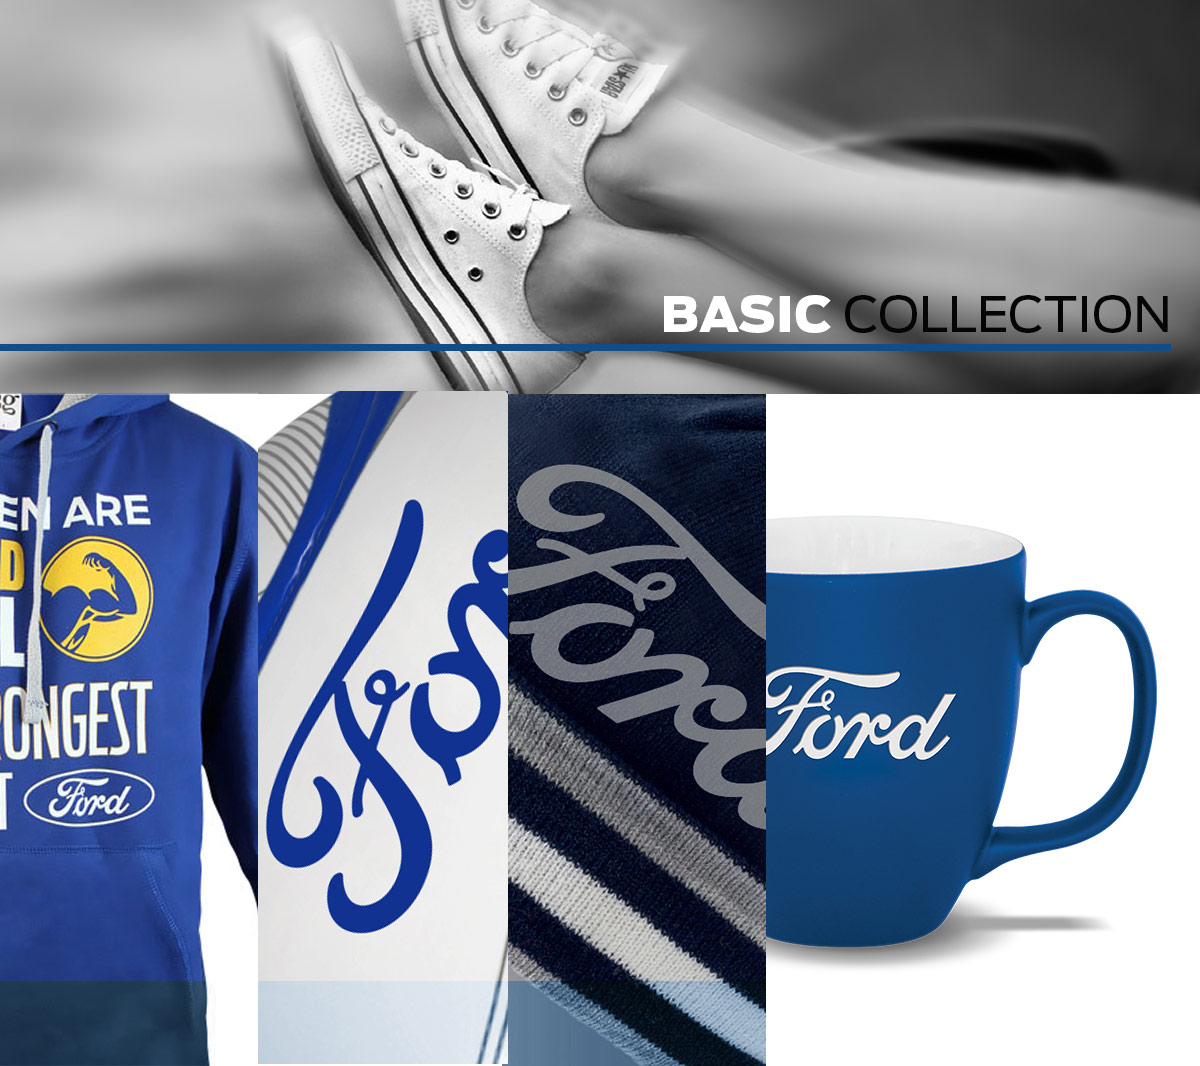 Basic Ford Lifestyle Collection